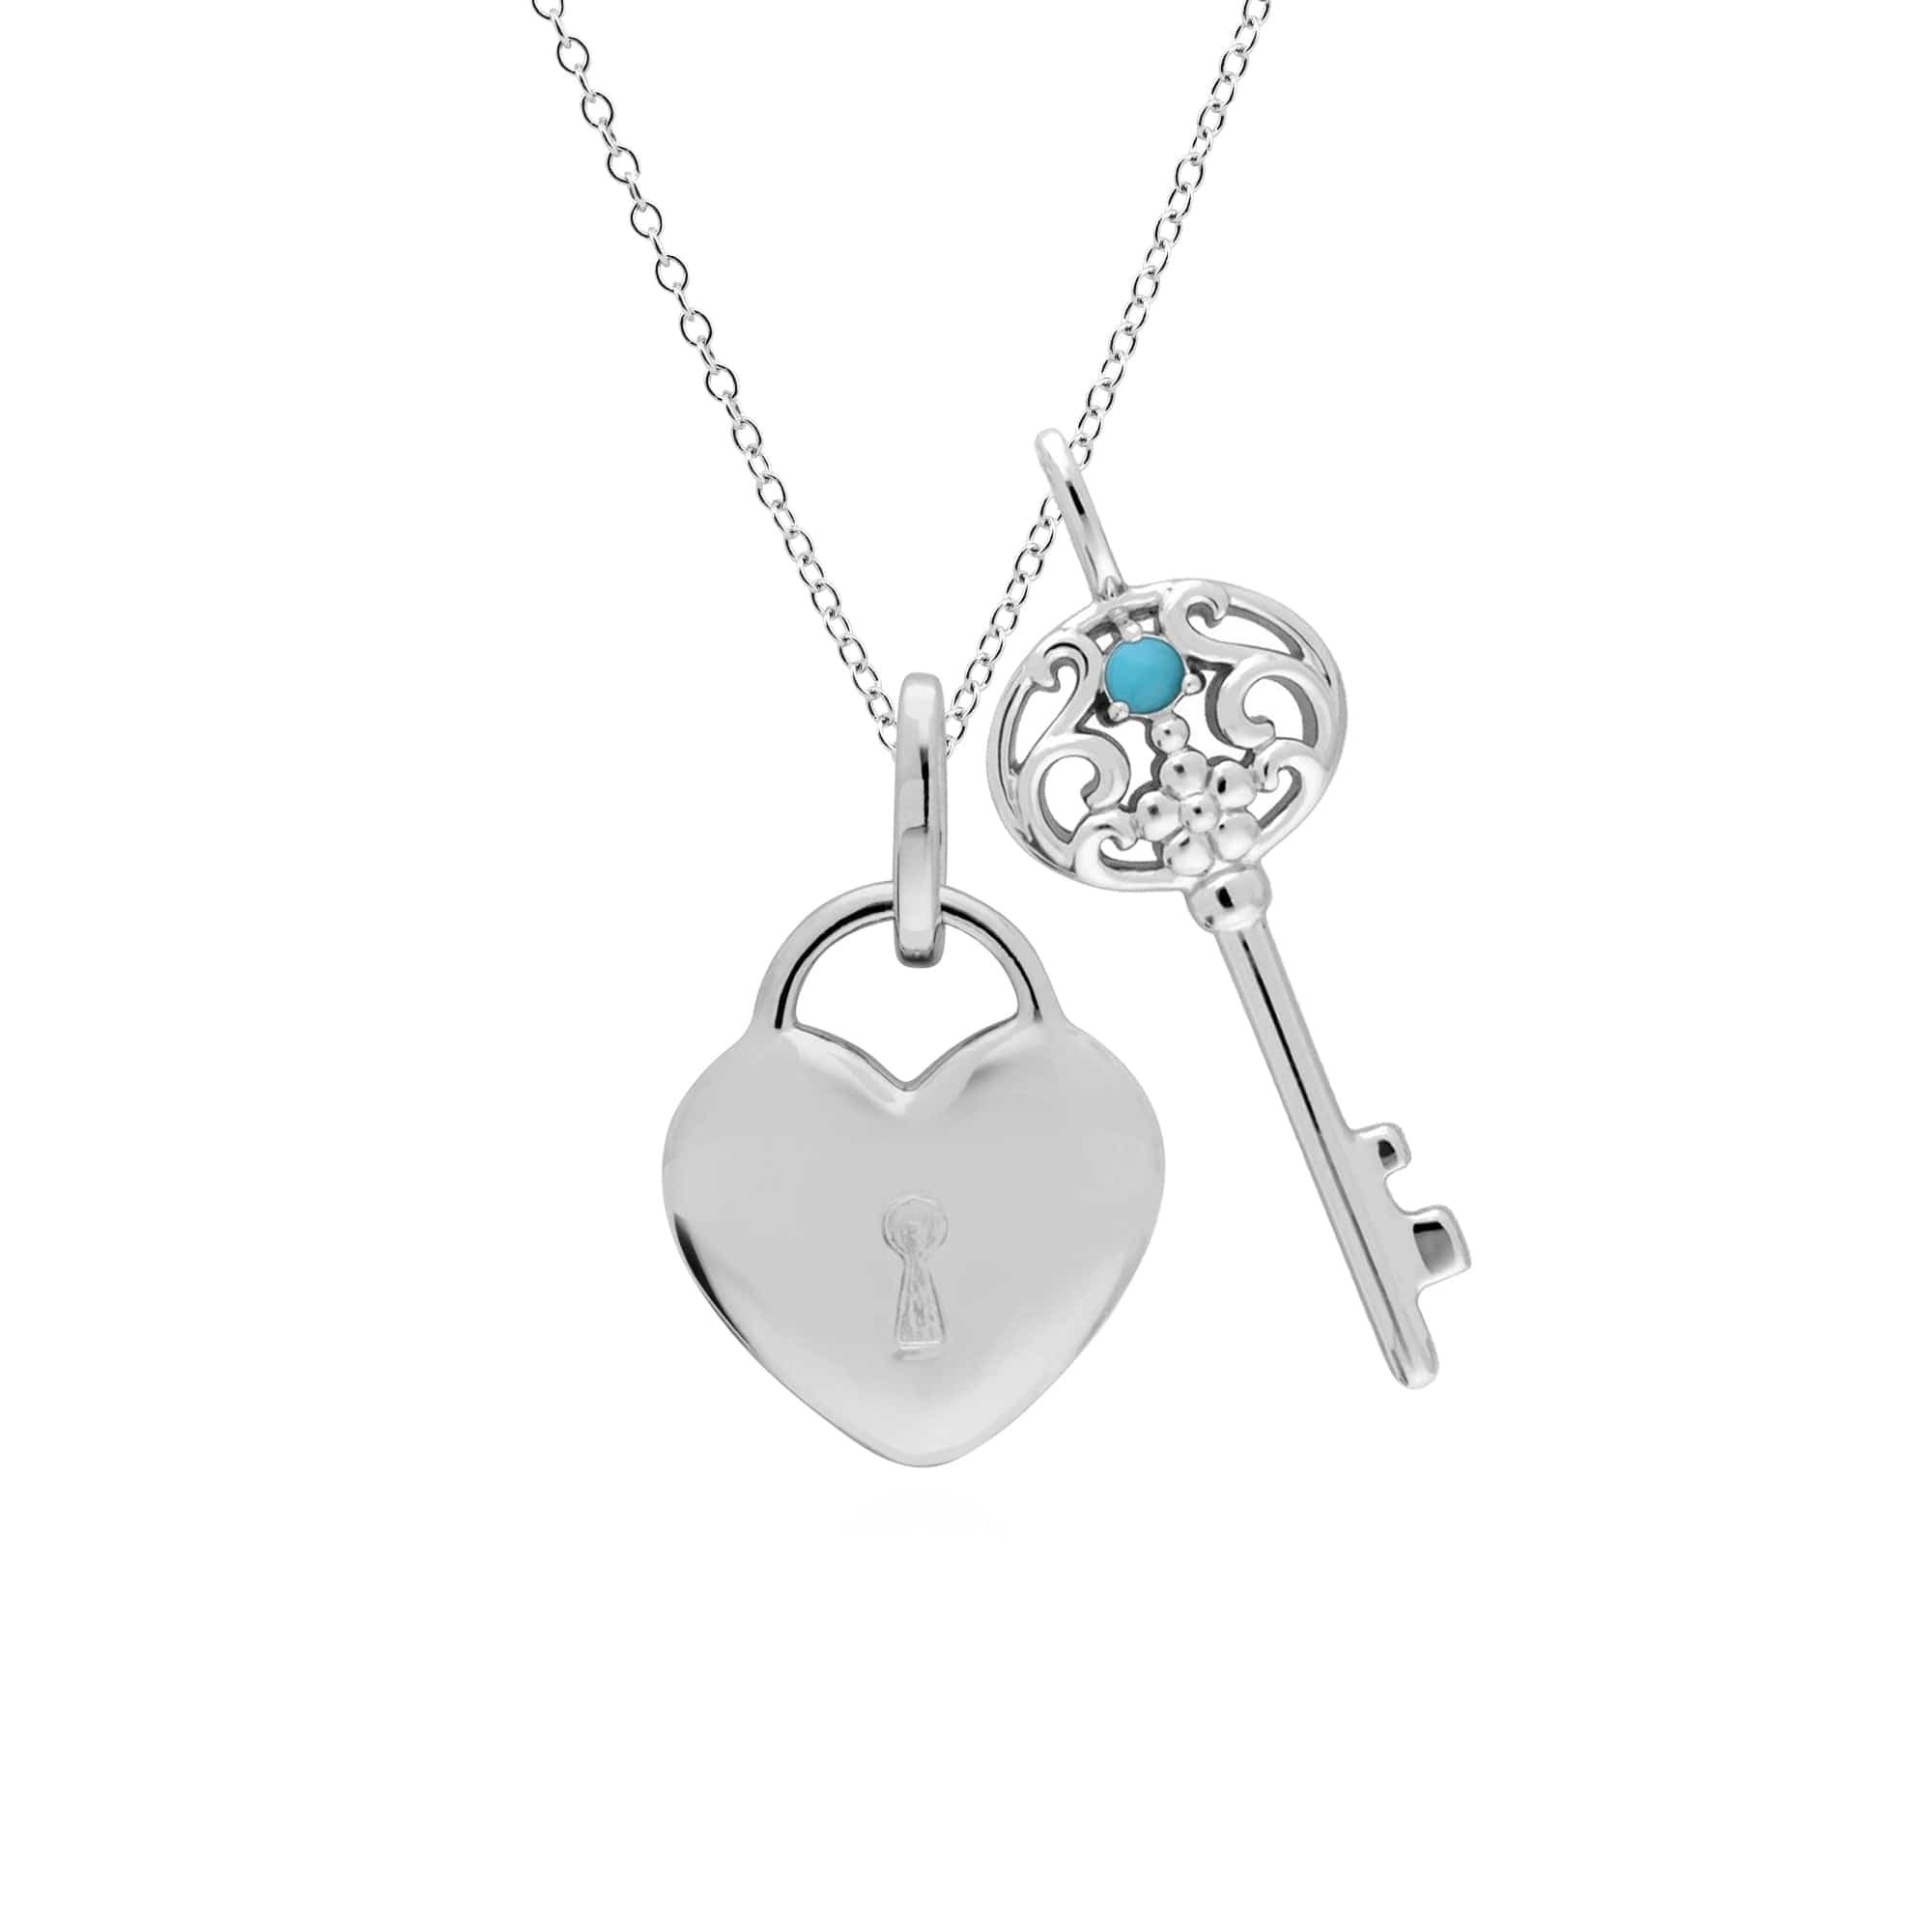 270P026805925-270P027001925 Classic Heart Lock Pendant & Turquoise Big Key Charm in 925 Sterling Silver 1